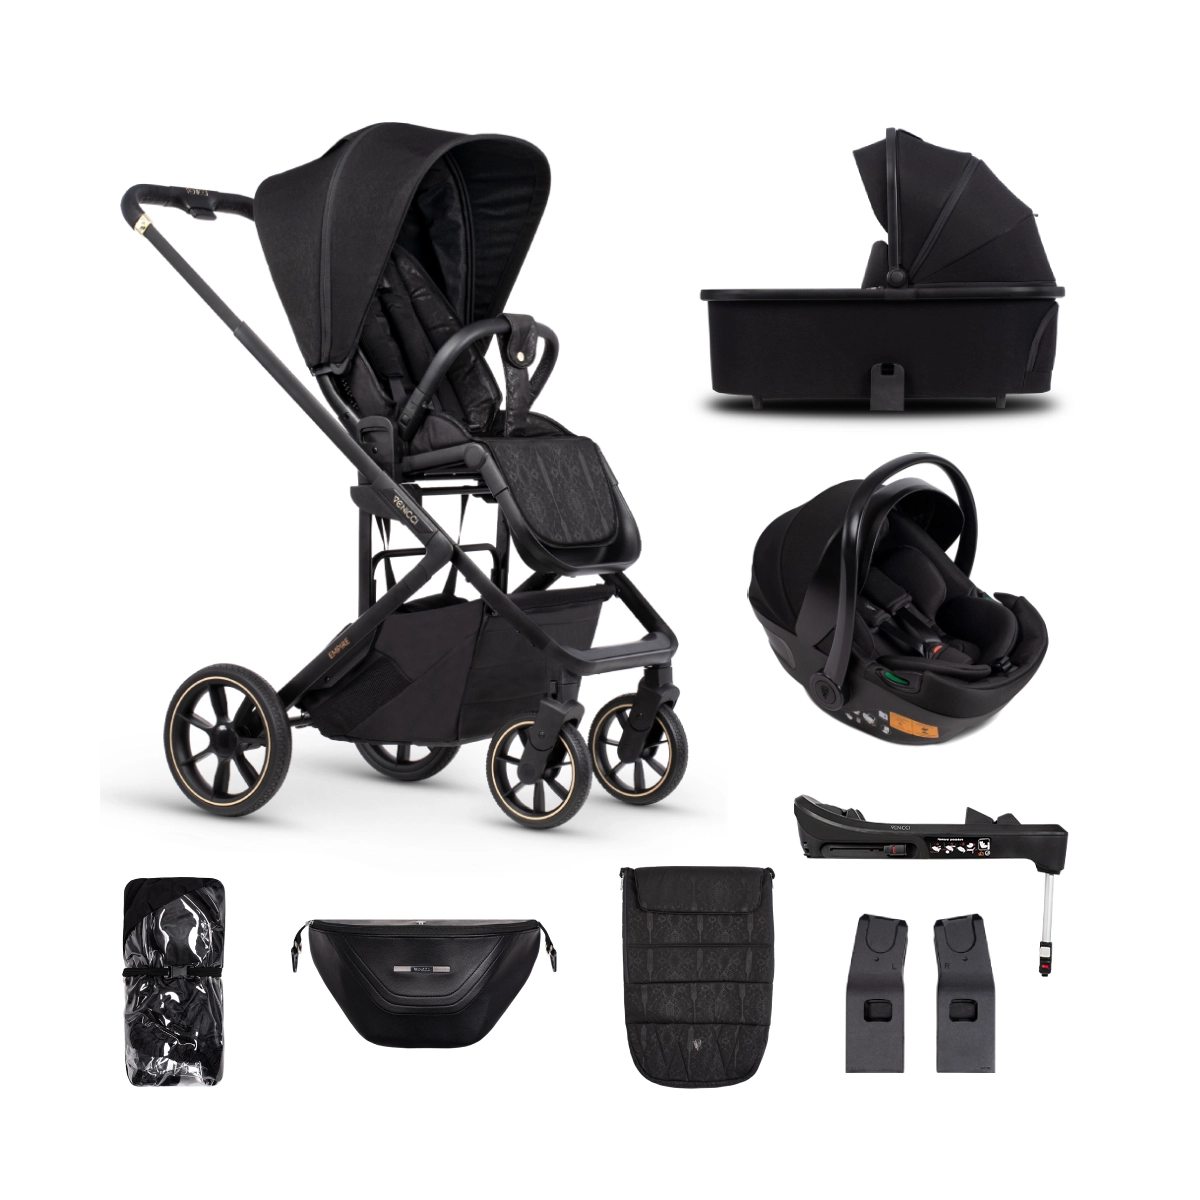 Venicci Empire 3in1 Travel System with Isofix Base